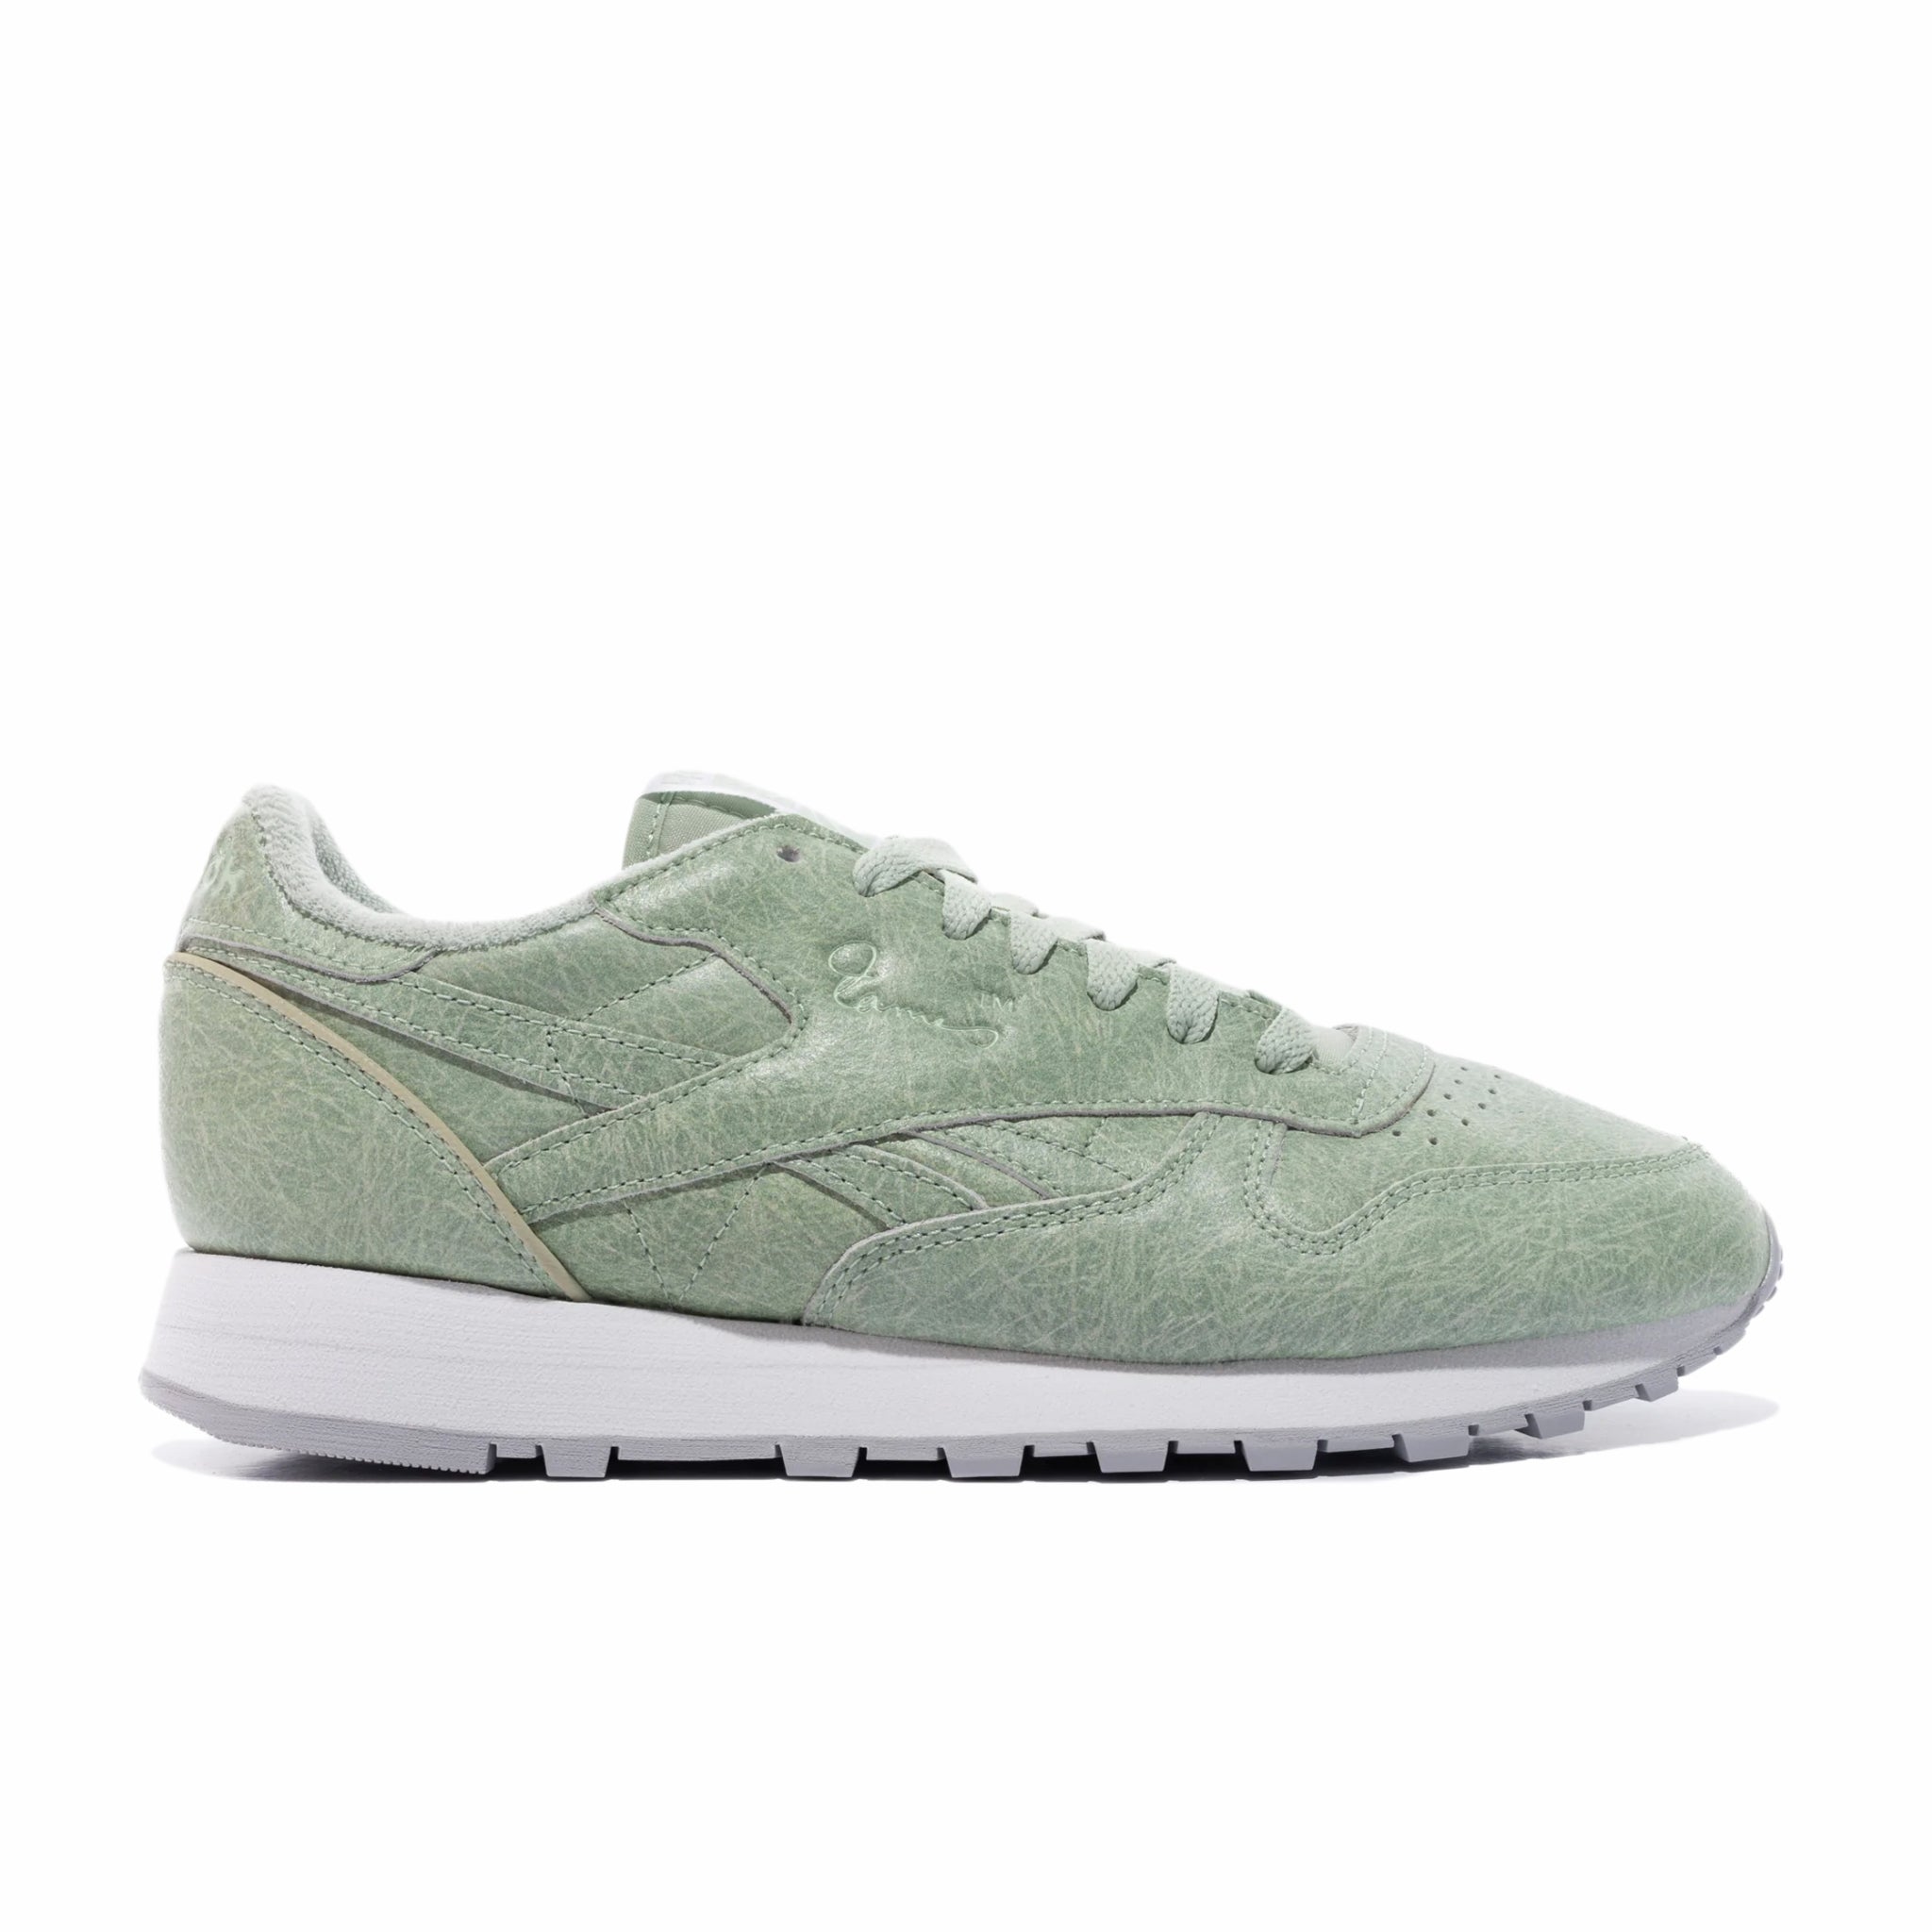 Reebok "Eames" Leather Sage/FTWR White/CDGRY2) August